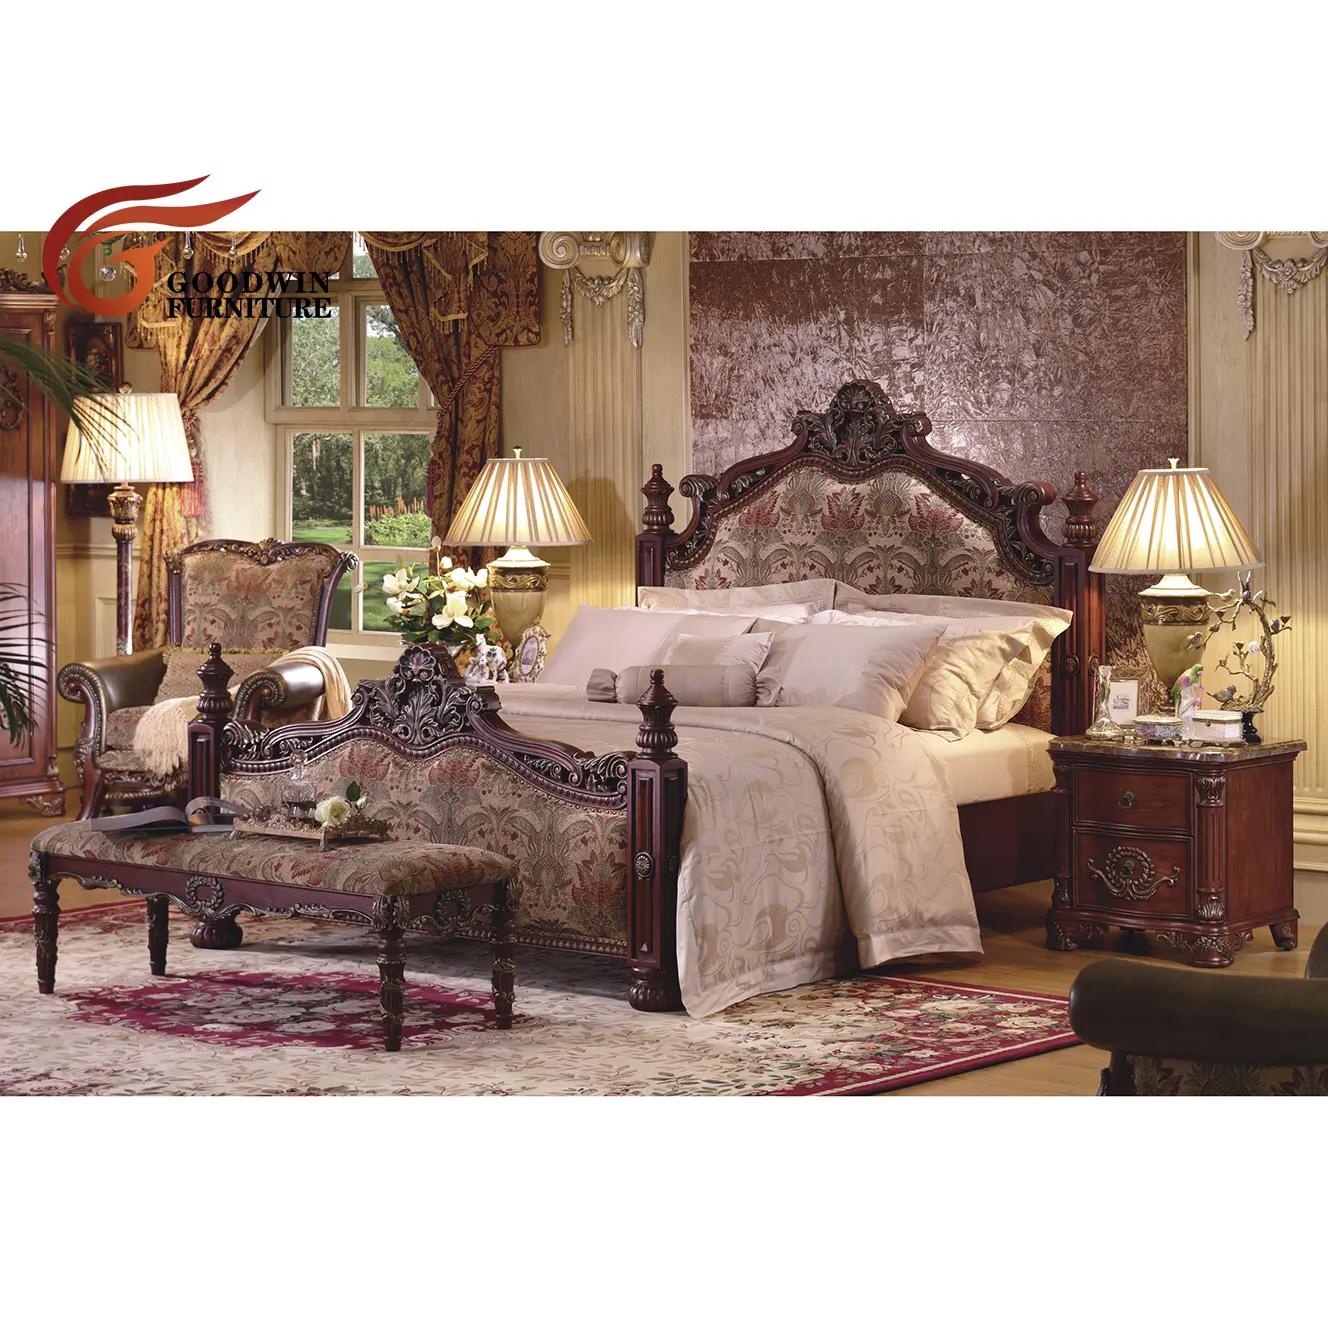 Goodwin Classic Royal Luxury Style  Home Wooden Bedroom Furniture Sets King Size Bed TM30B